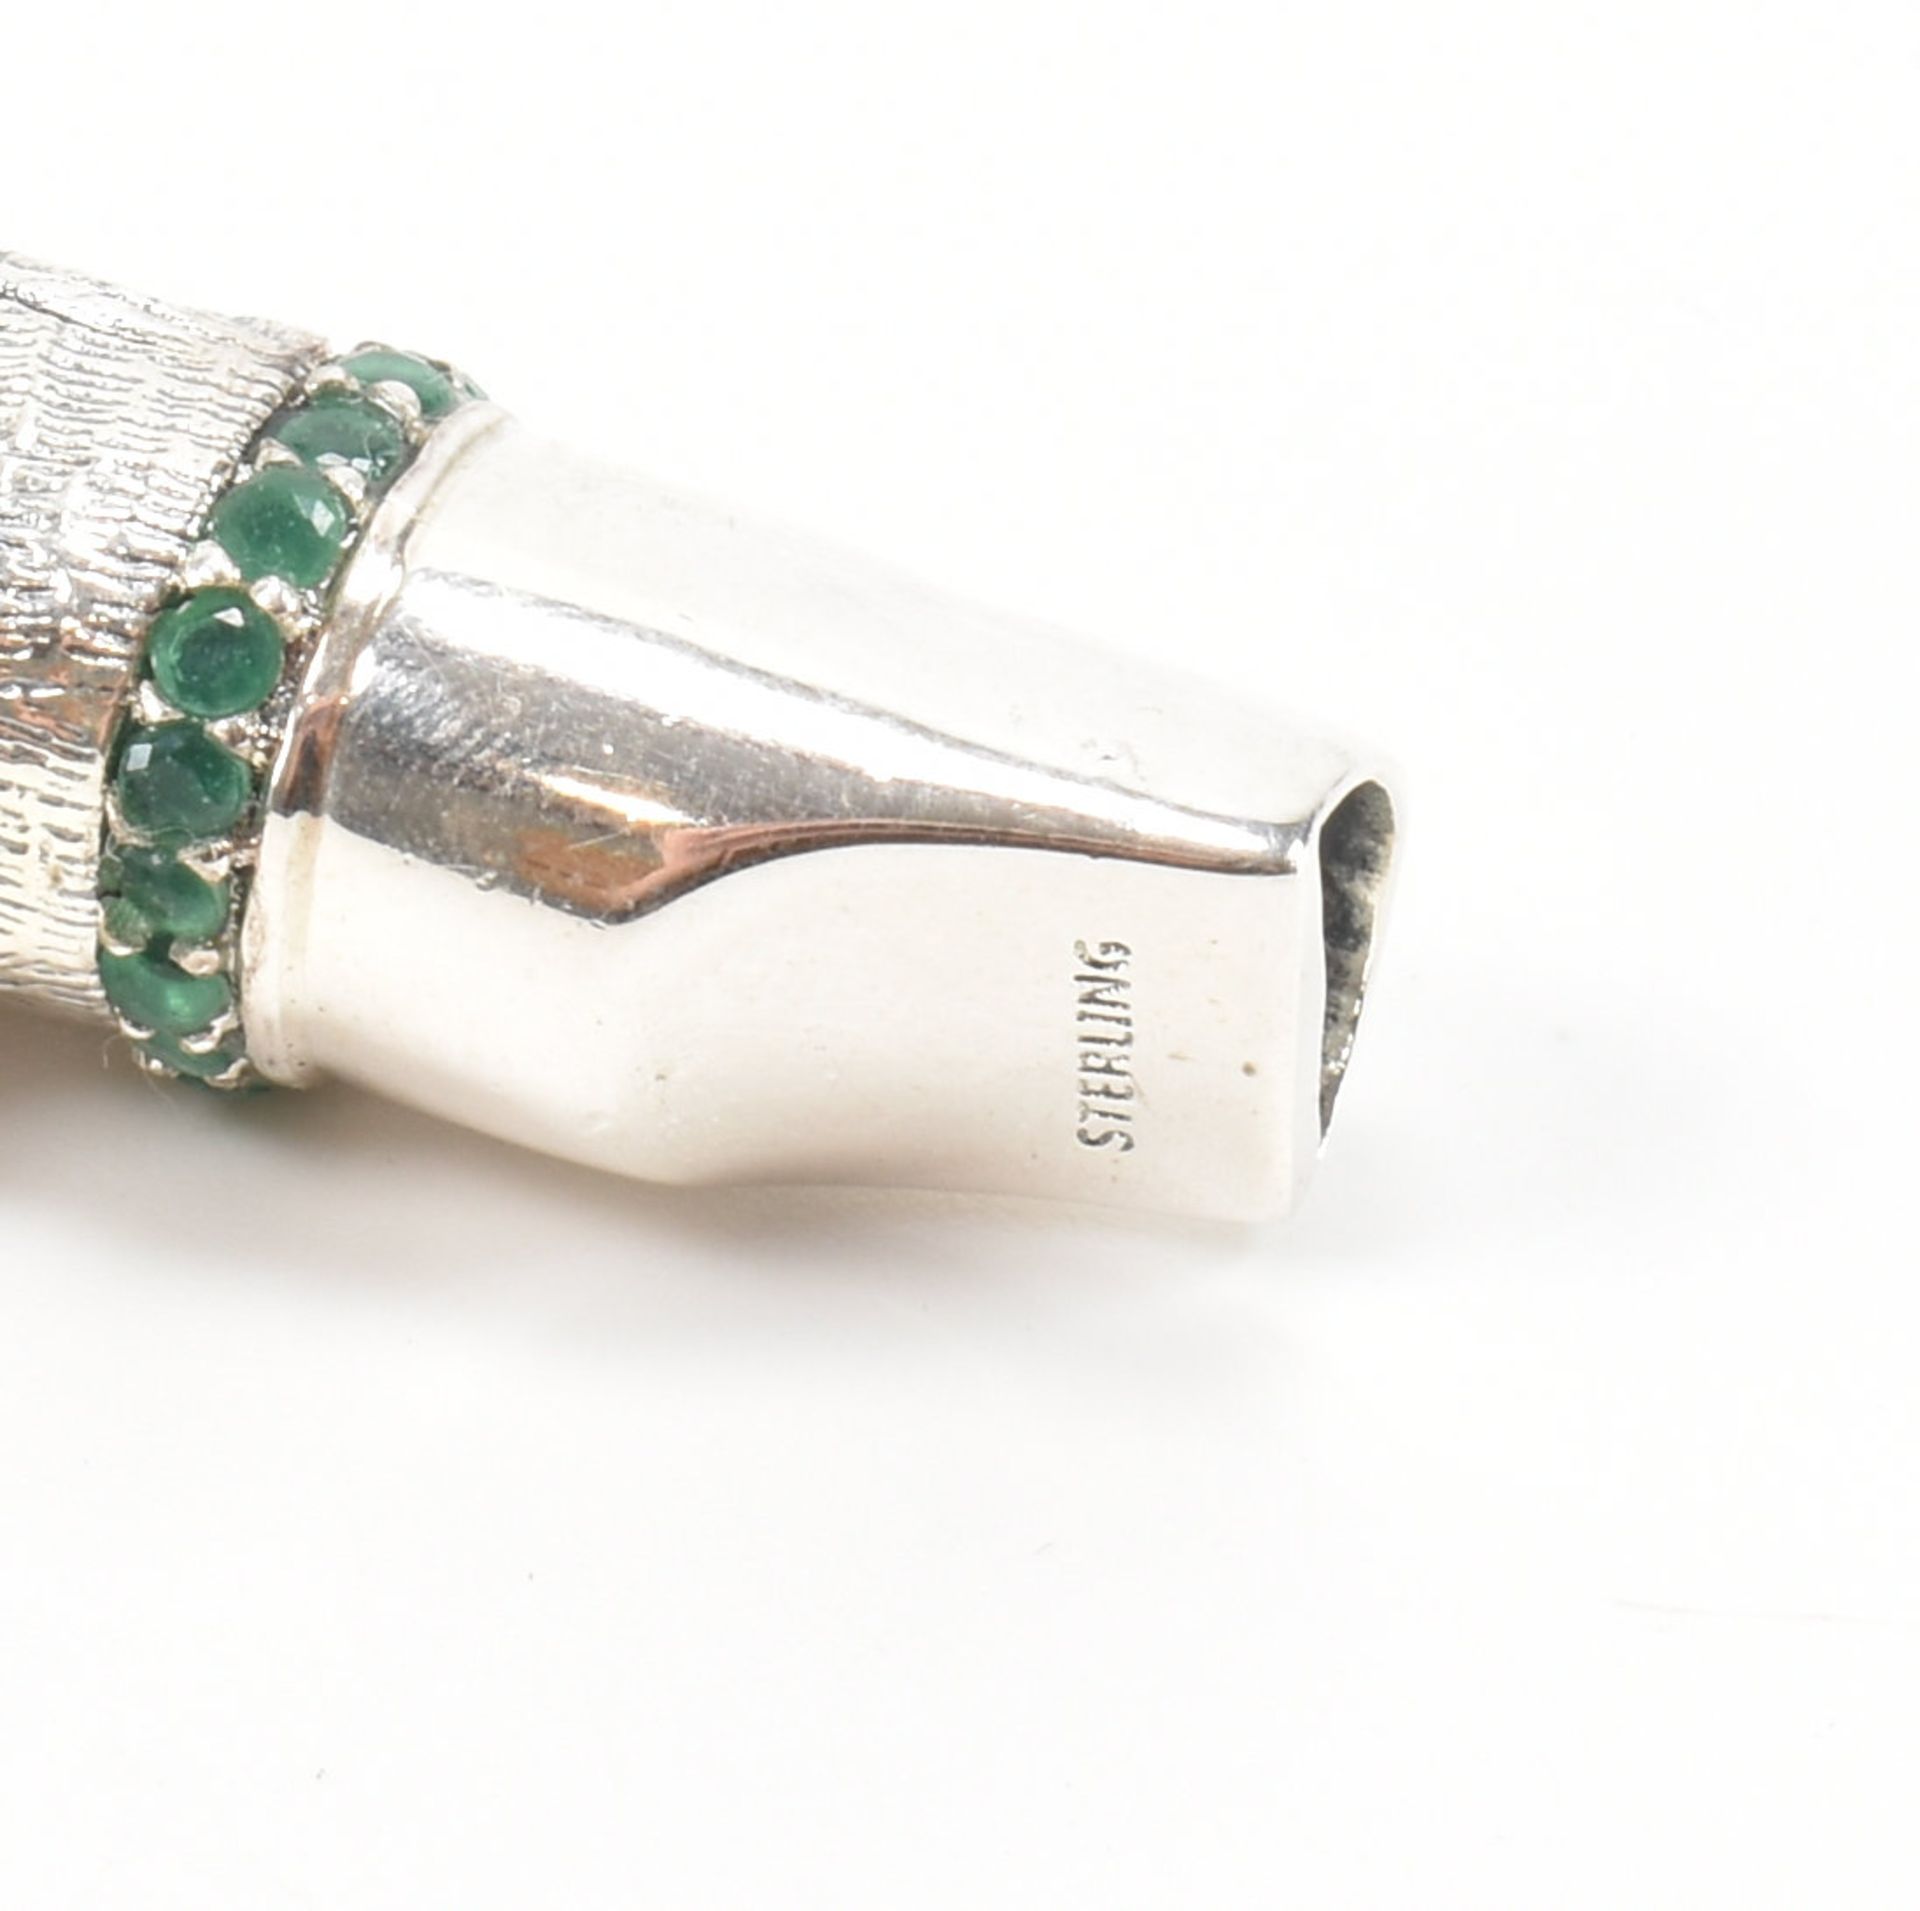 STERLING SILVER HORSES HEAD WHISTLE WITH GREEN STONE DETAILING - Image 2 of 3